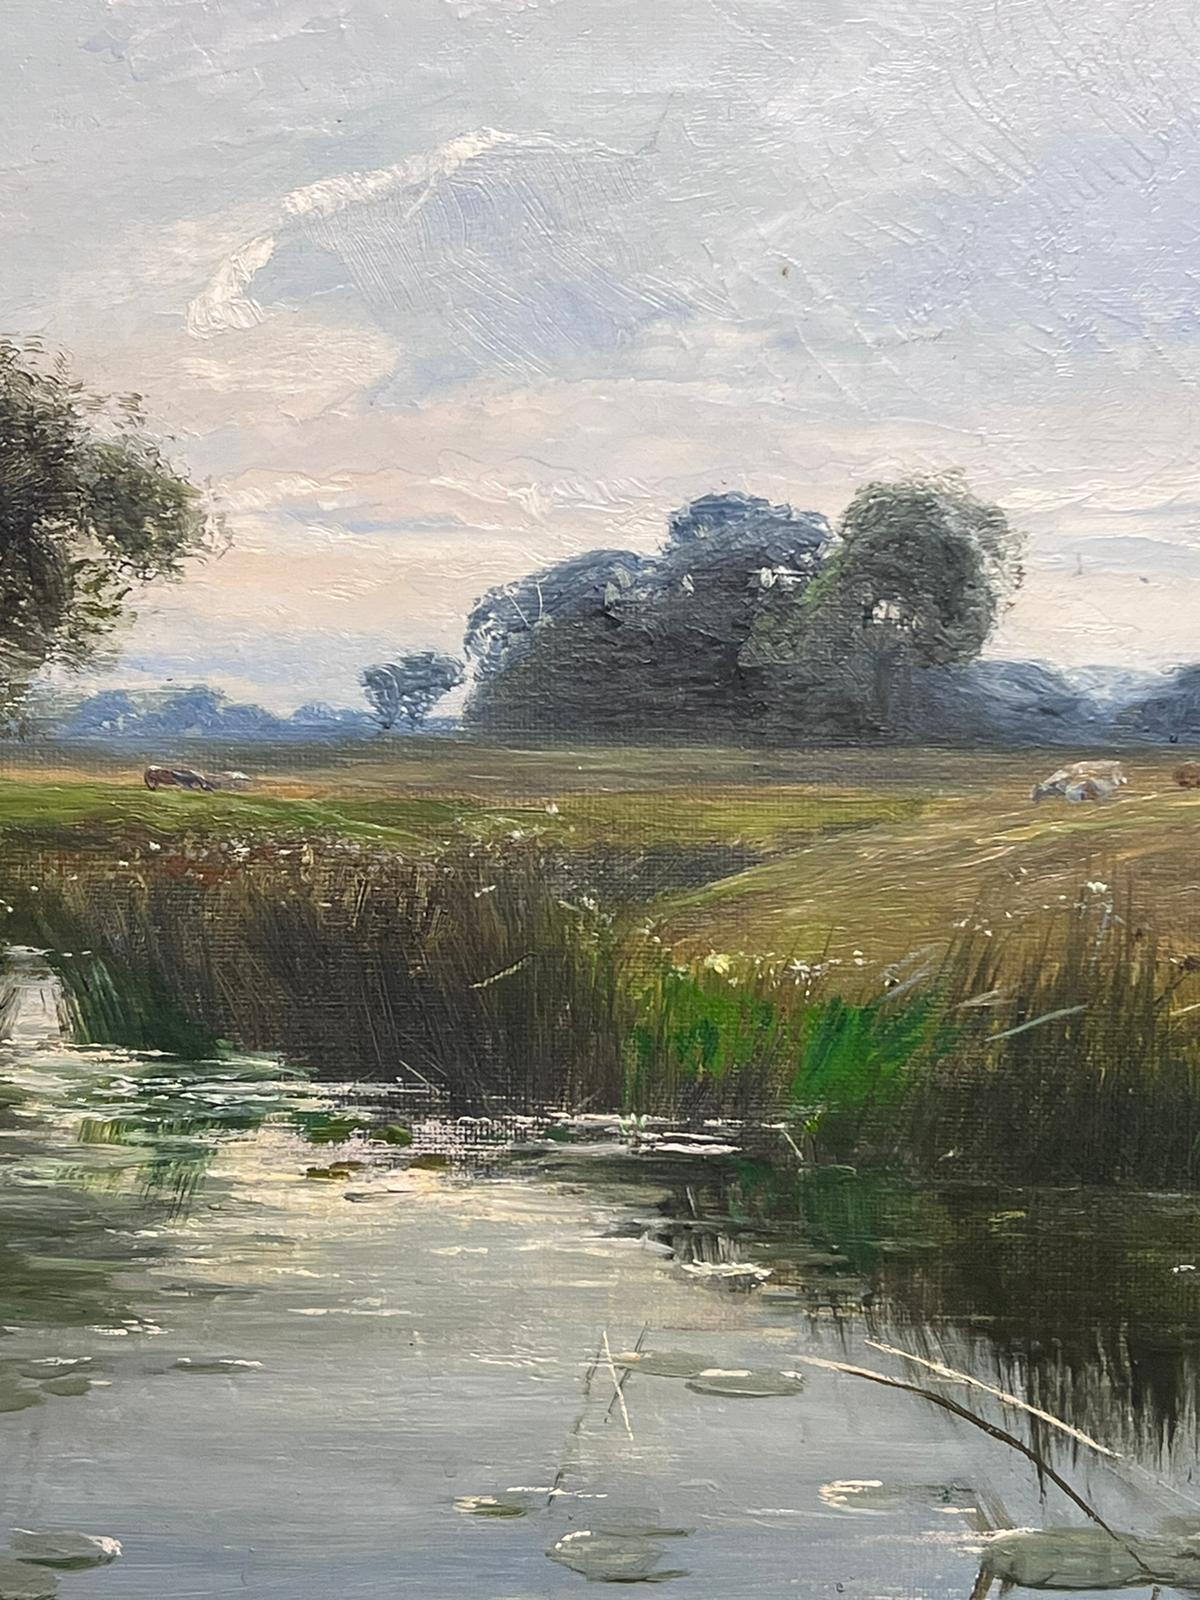 Tranquil Landscape
by Rex Vicat Cole (British 1870-1940) * see notes below
signed & dated 1899
oil on canvas, framed
framed: 16 x 20 inches
canvas: 10 x 14 inches
provenance: private collection, UK
condition: very good and sound condition; please